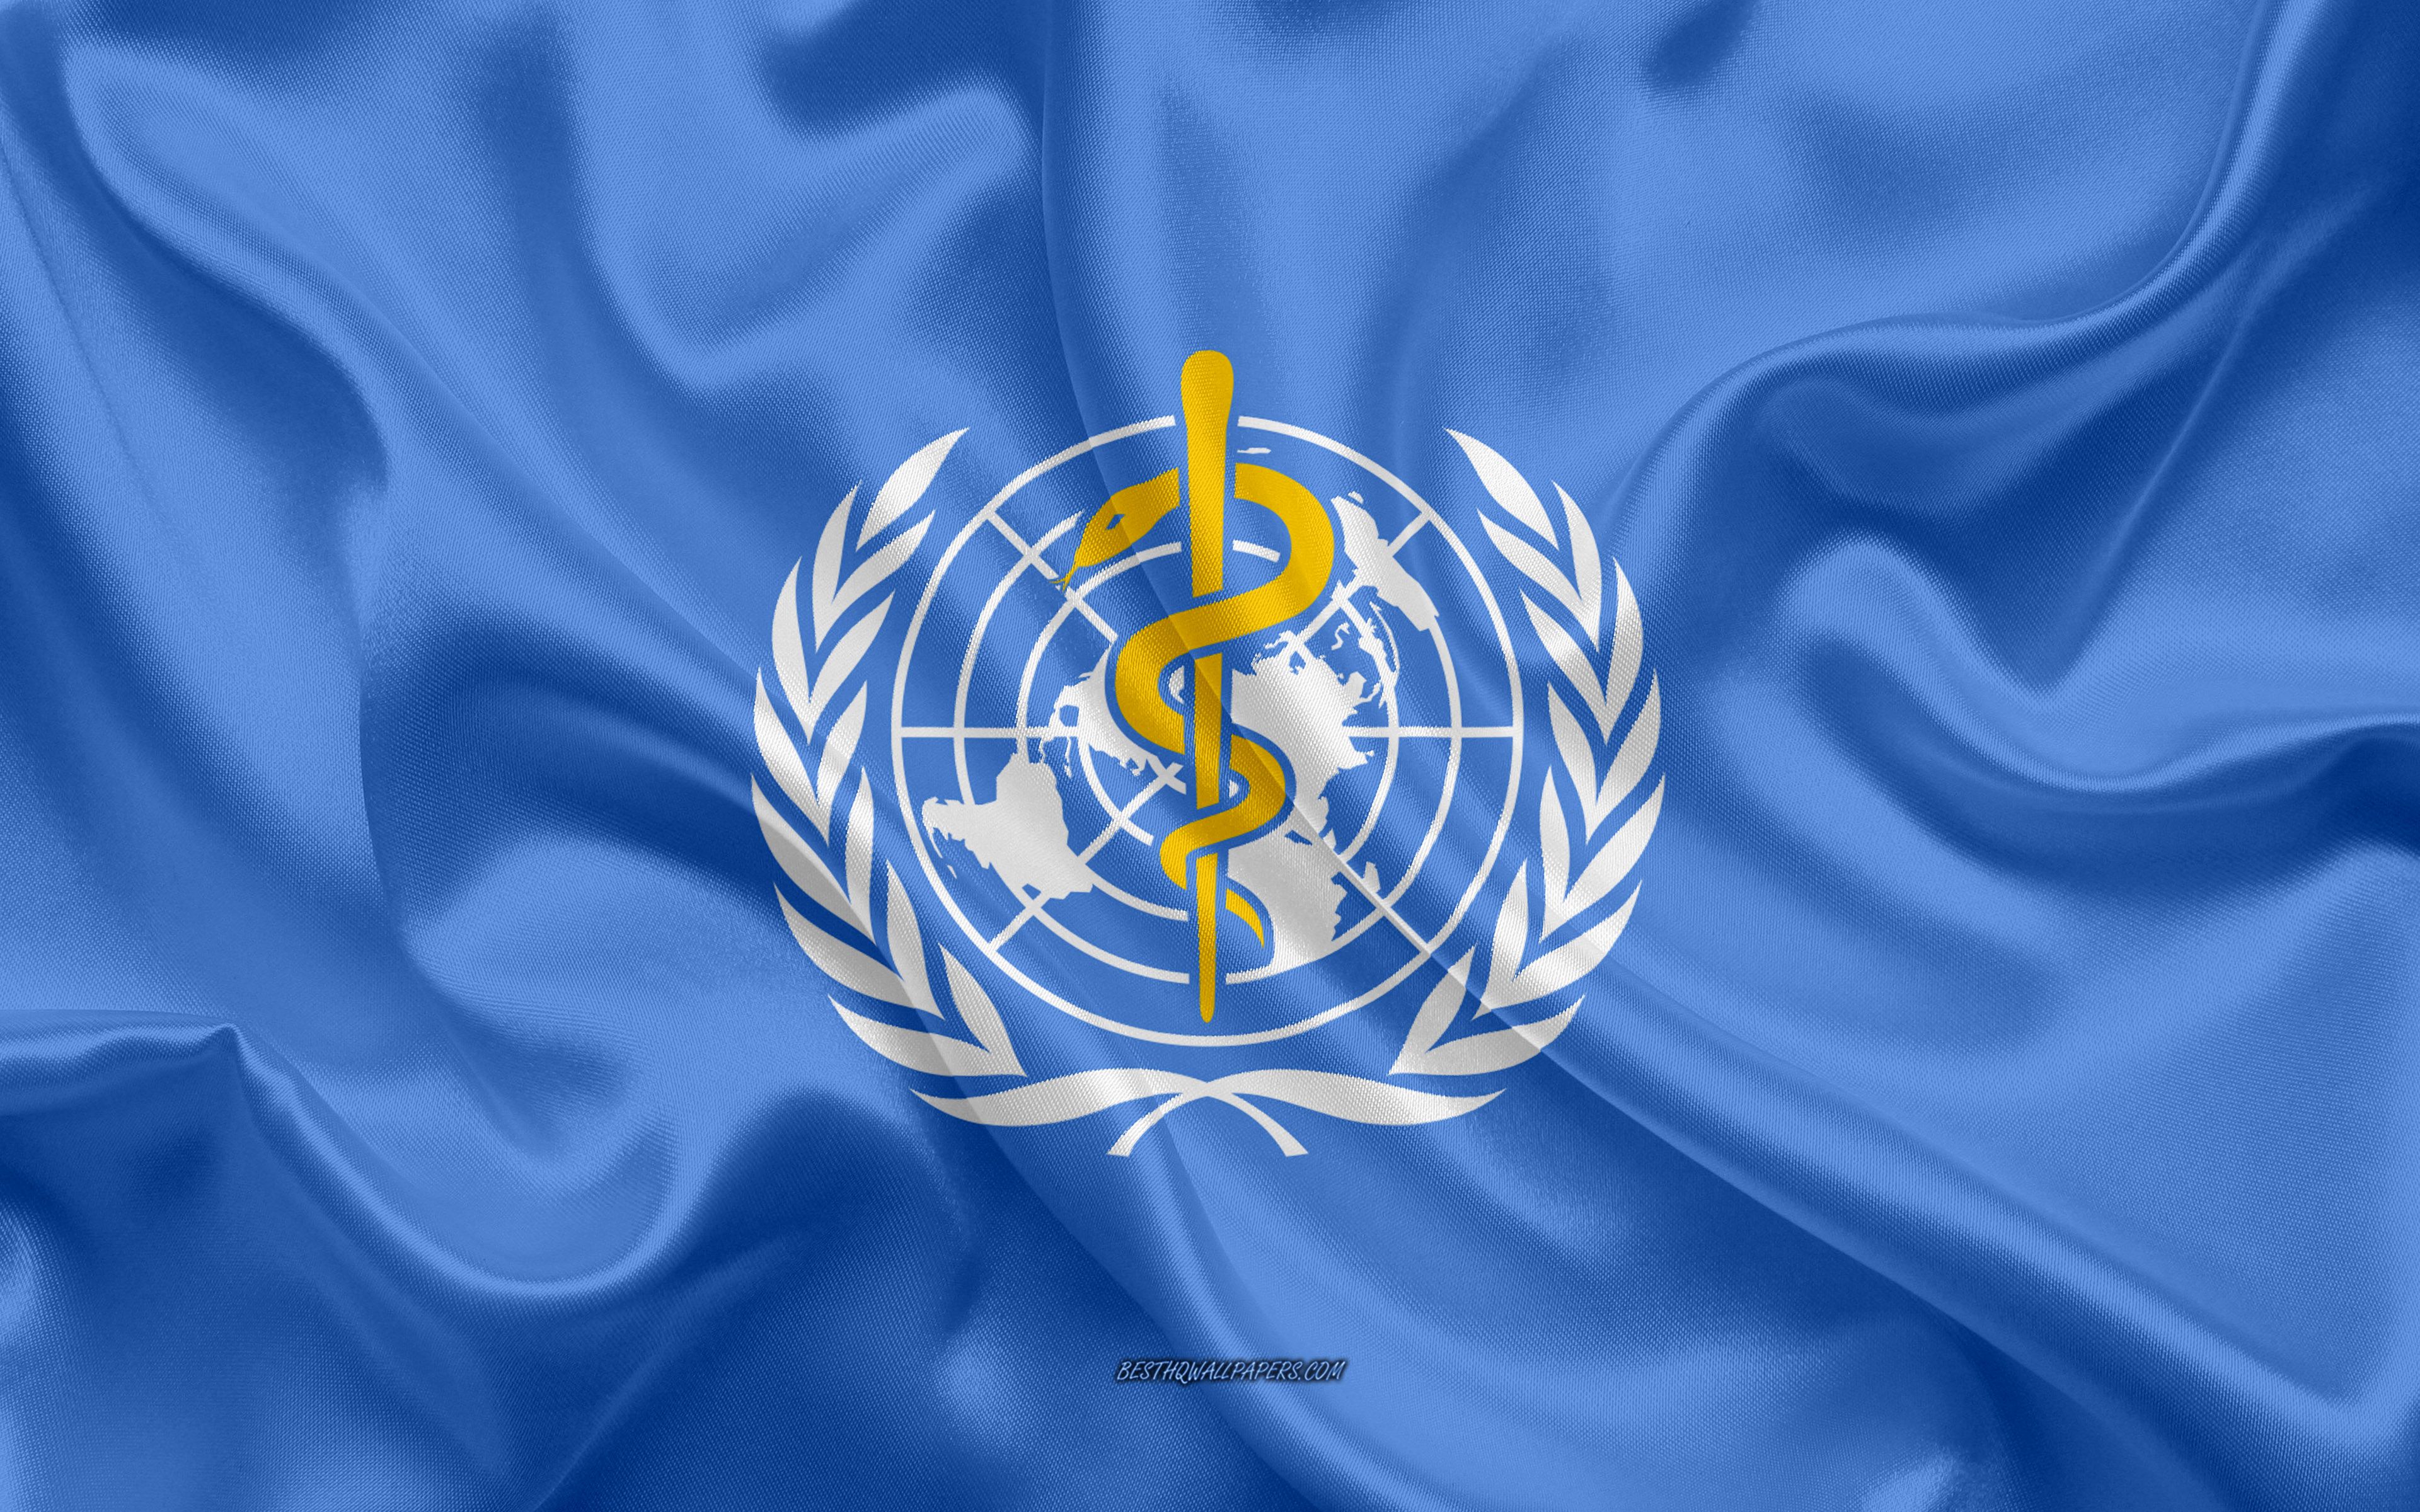 Download wallpaper Flag of WHO, World Health Organization flag, United Nations, 4k, silk texture, blue silk flag, World Health Organization logo, WHO flag for desktop with resolution 3840x2400. High Quality HD picture